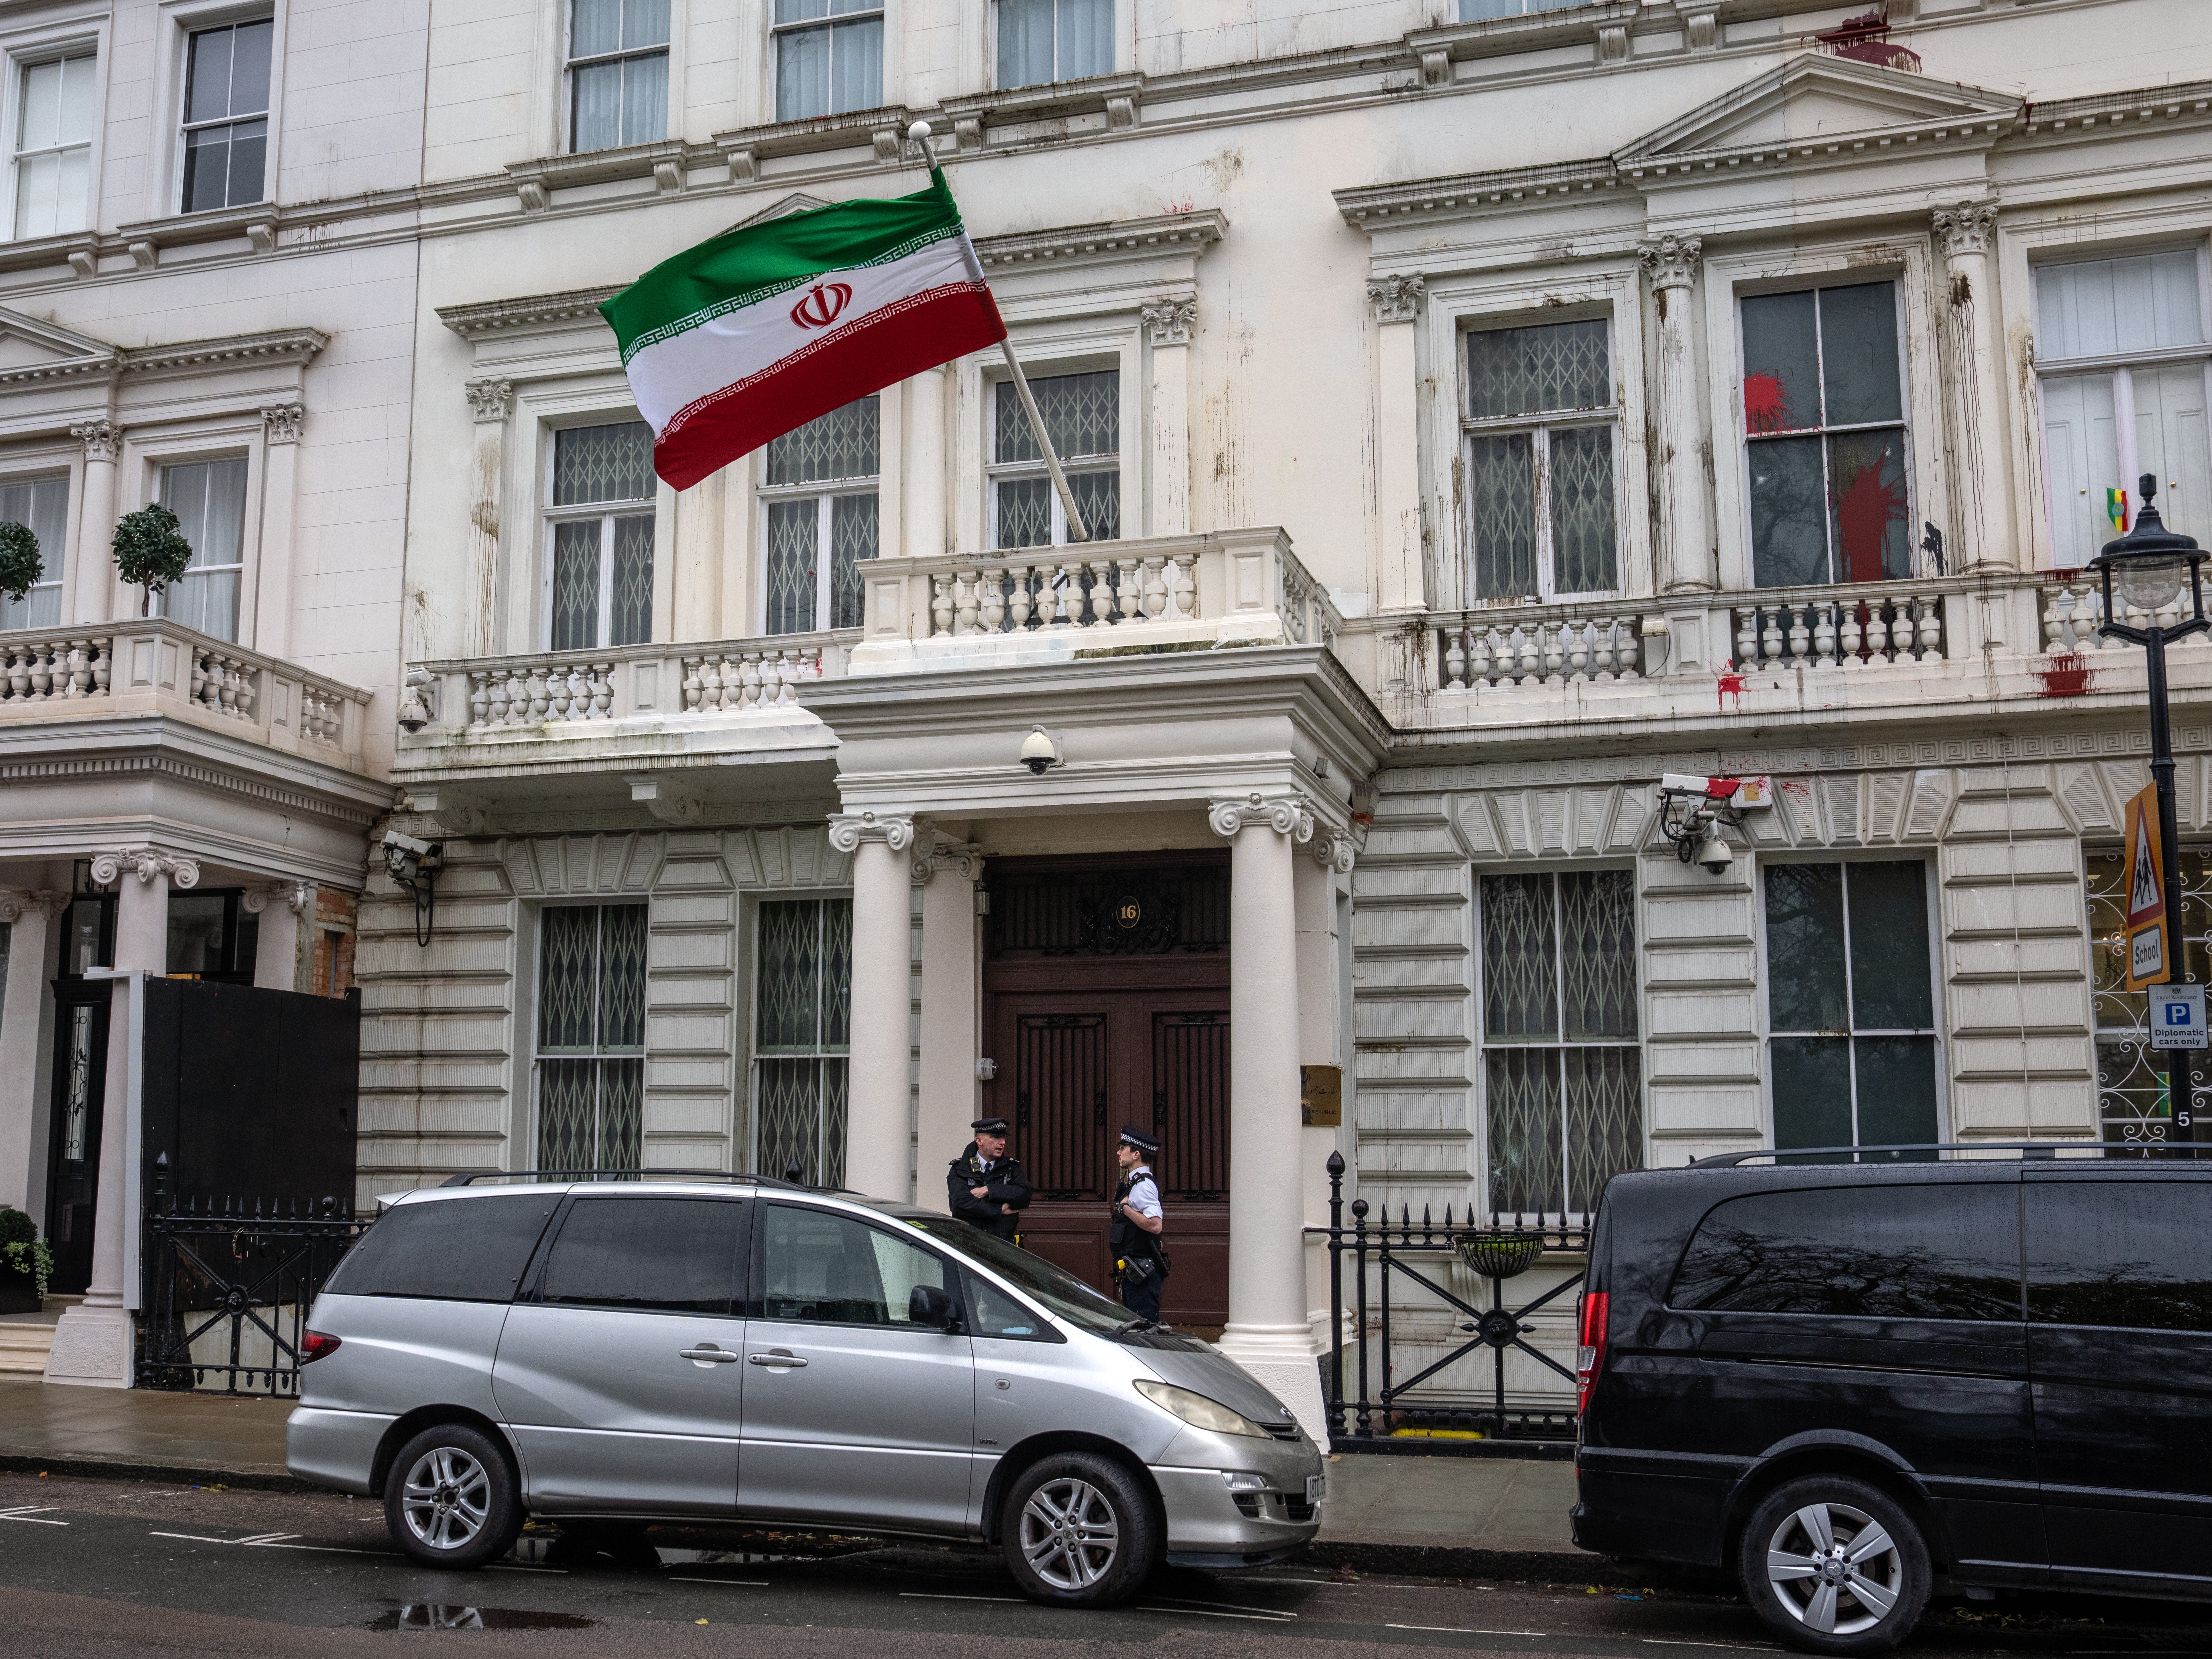 Police on guard outside the Iranian embassy in London